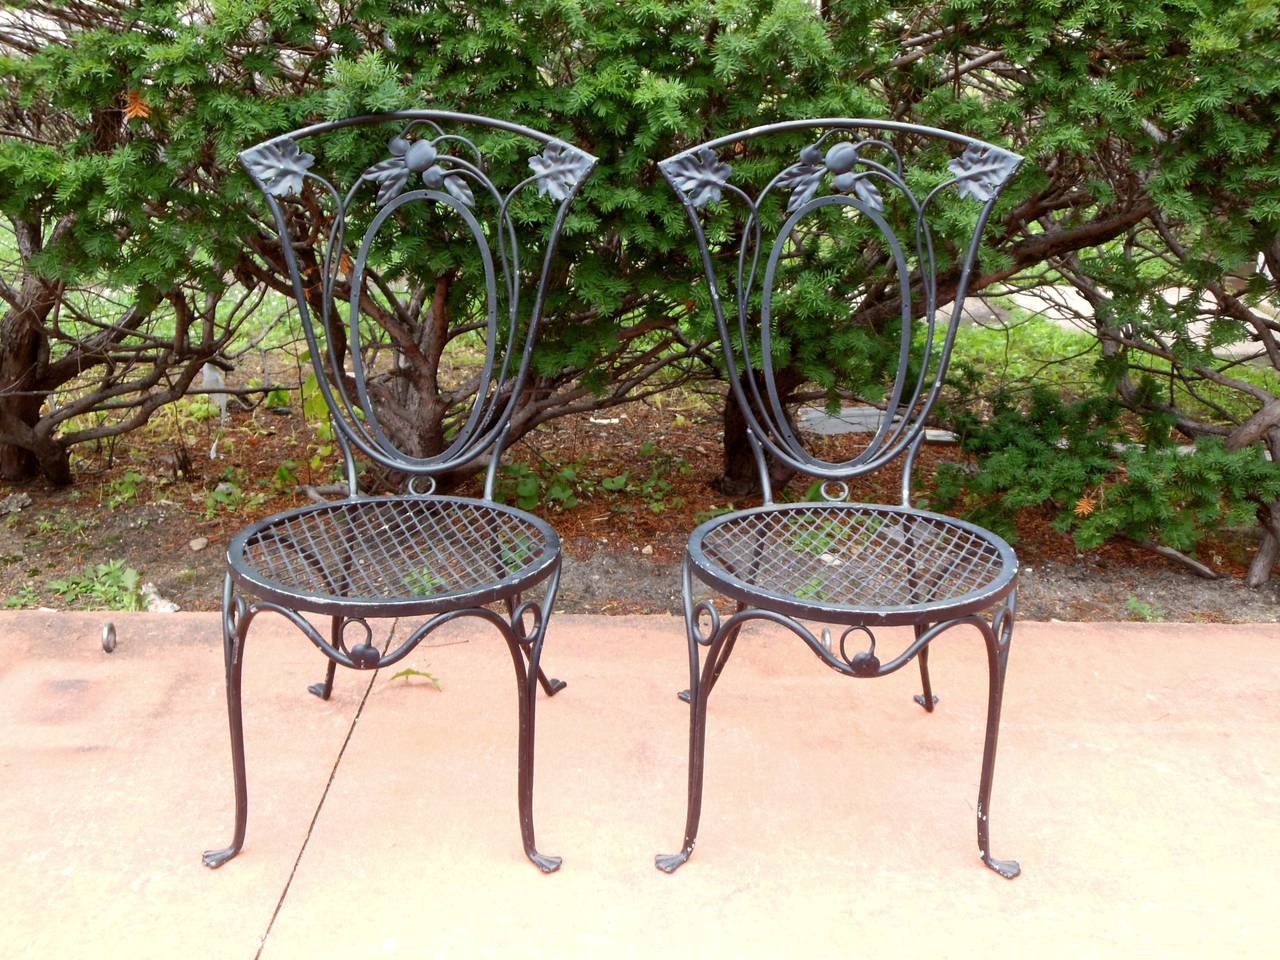 A seven-piece wrought iron dining room set by John Salterini, the premier 
manufacturer of wrought iron patio furniture in NY in the second quarter of the 
20th century. Salterini in his catalogue called this pattern "French